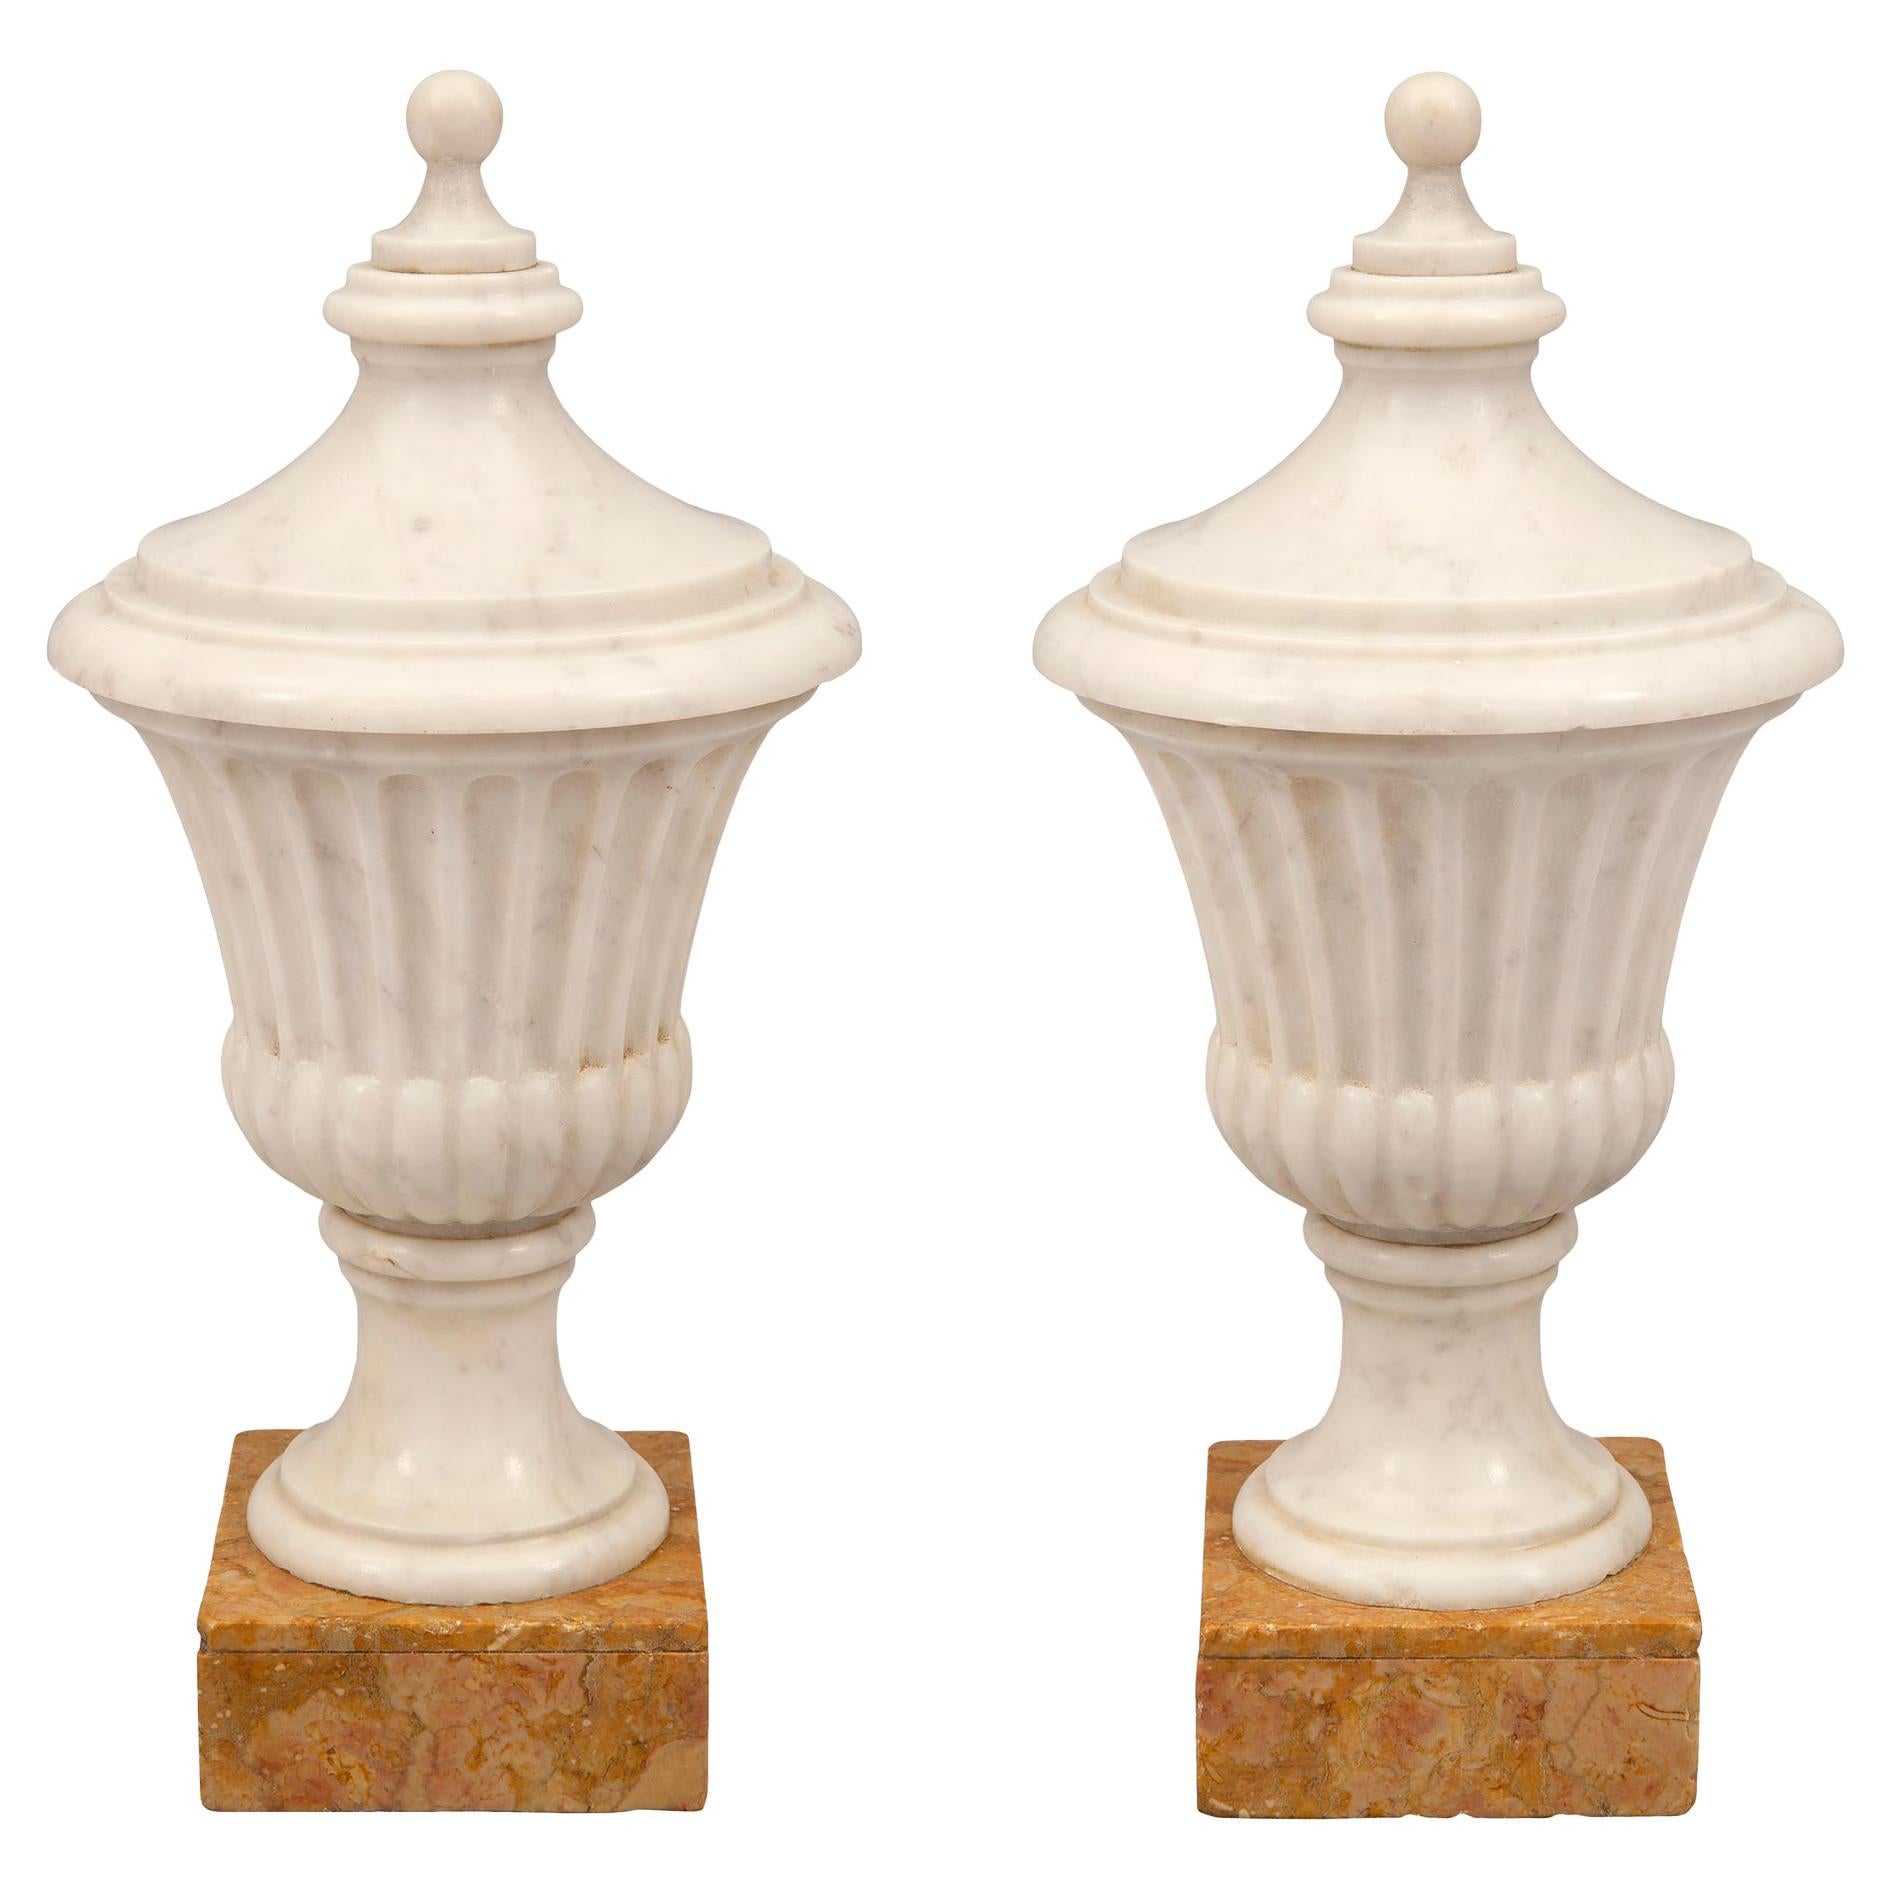 Pair of Italian 19th Century Neoclassical Style Decorative Marble Urns For Sale